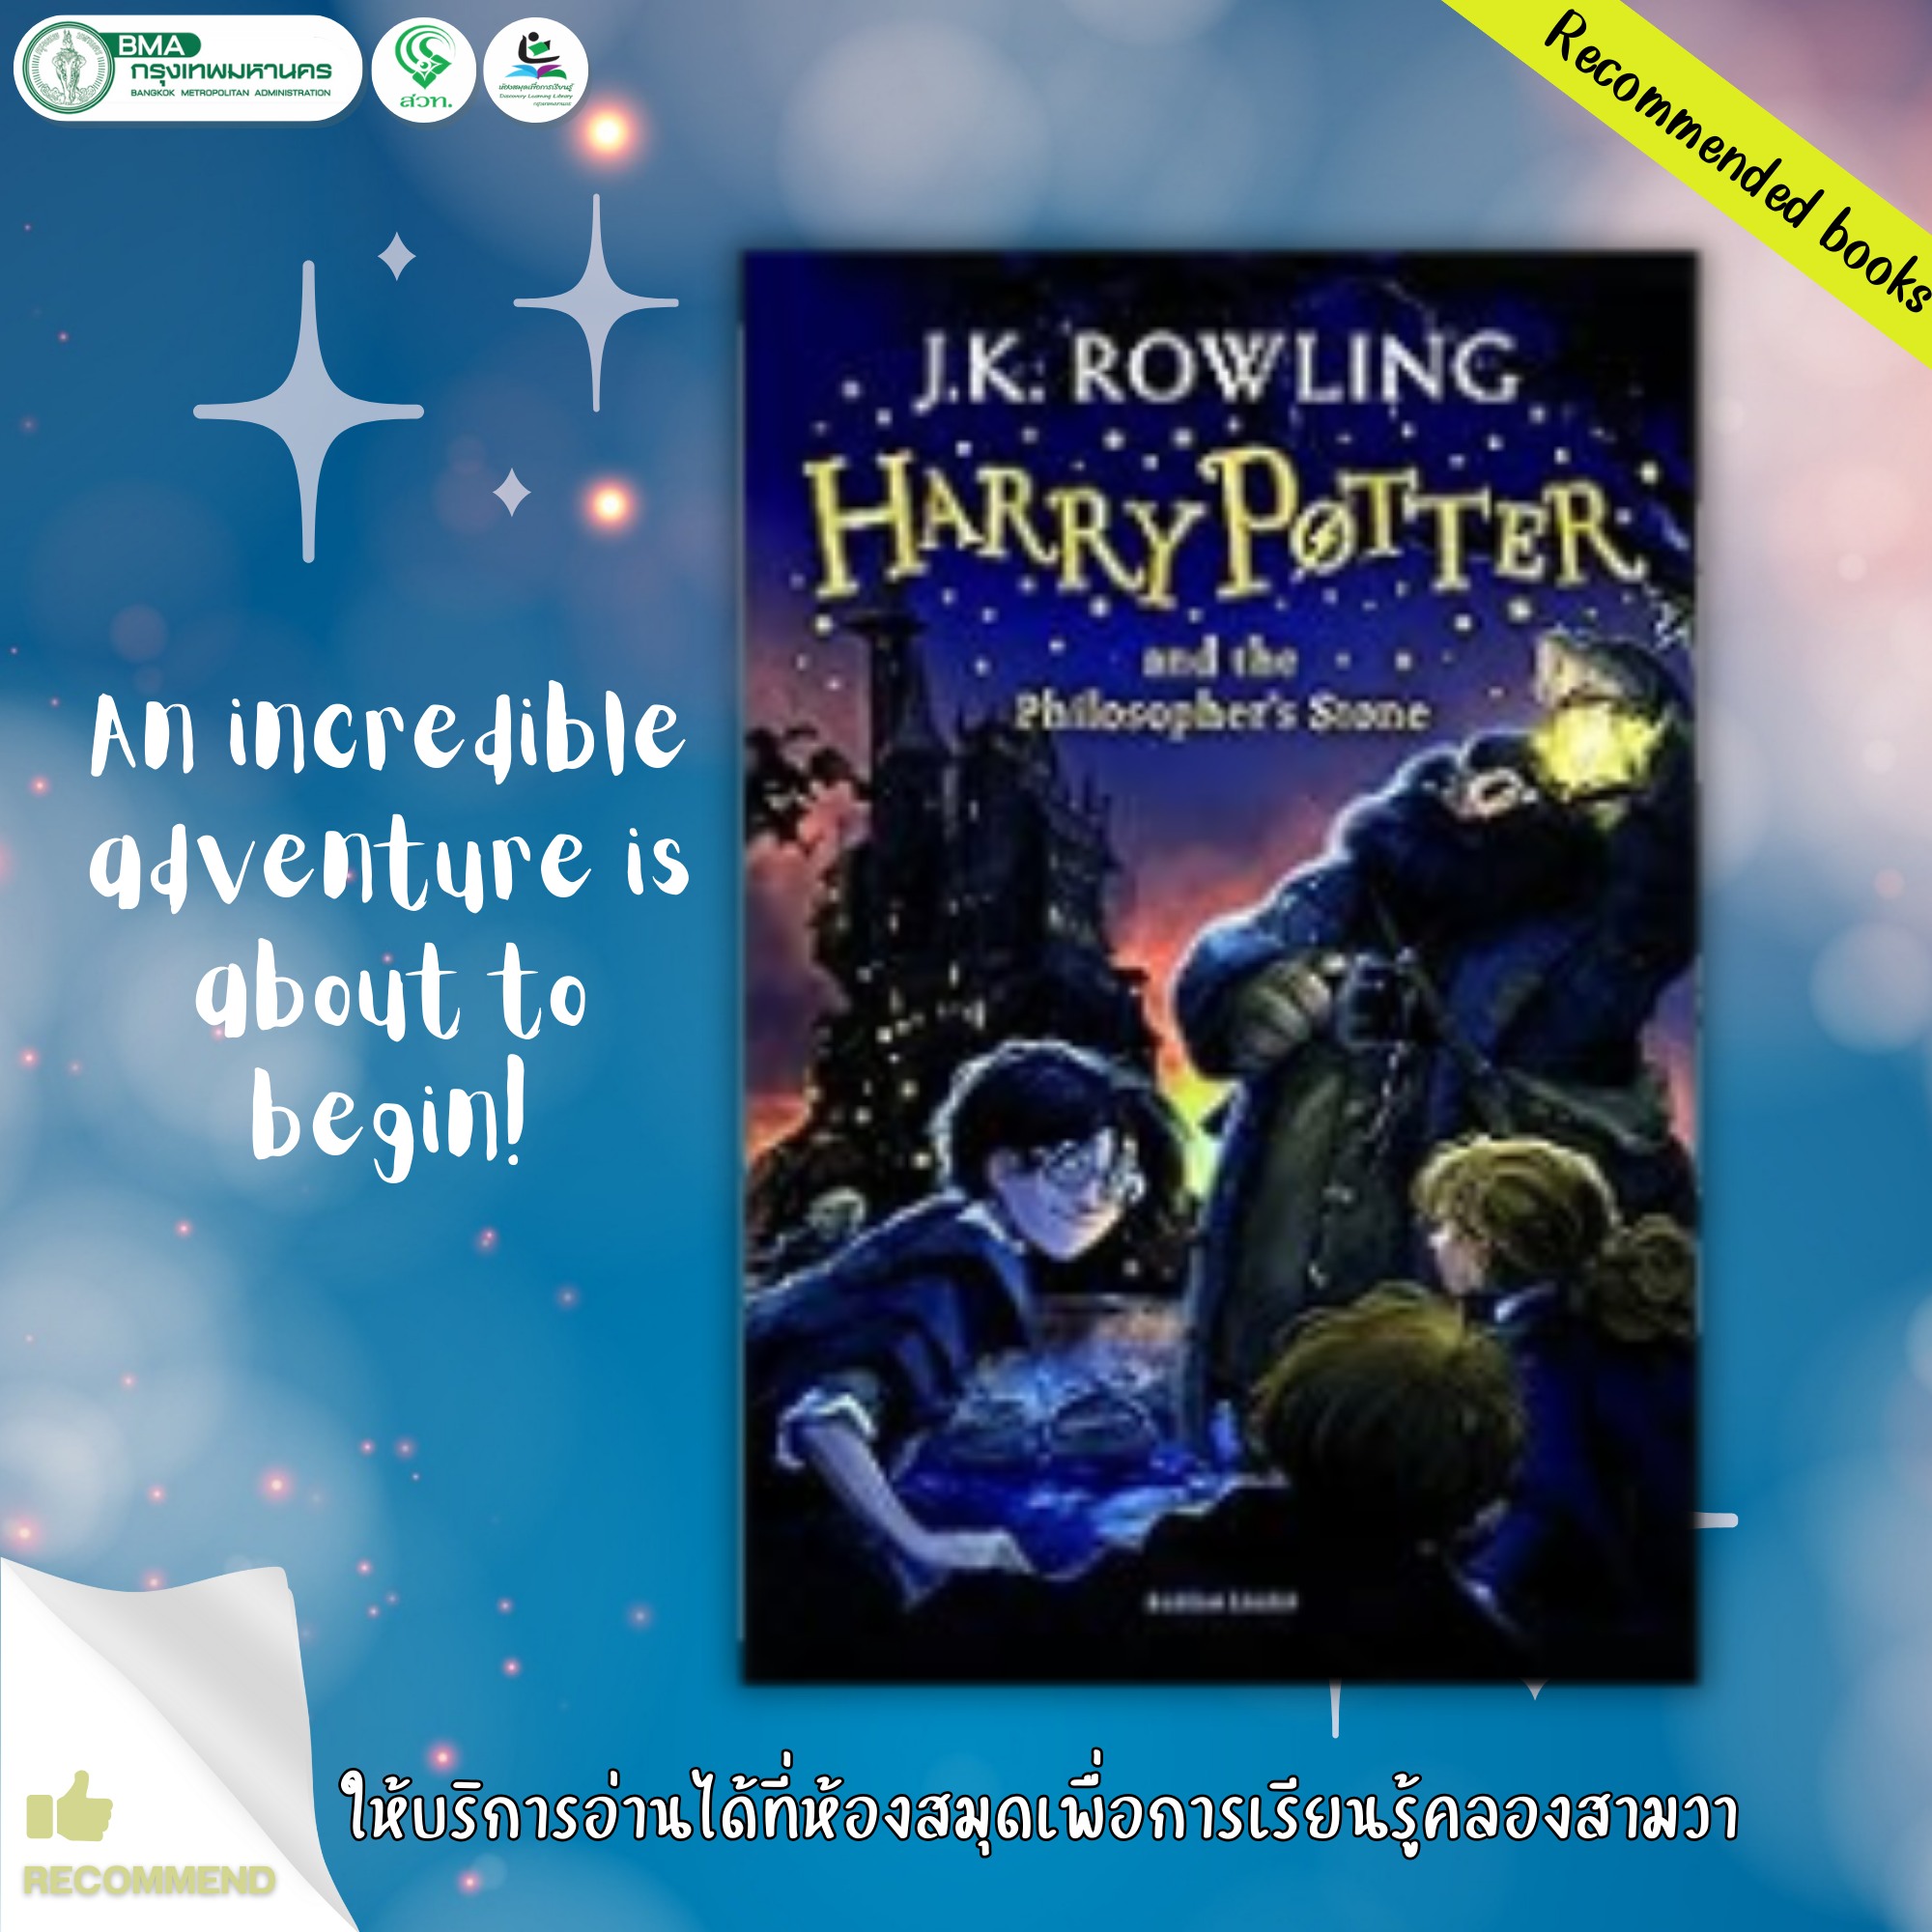 Harry Potter and the Philosopher's Stone ฉบับภาษาอังกฤษ